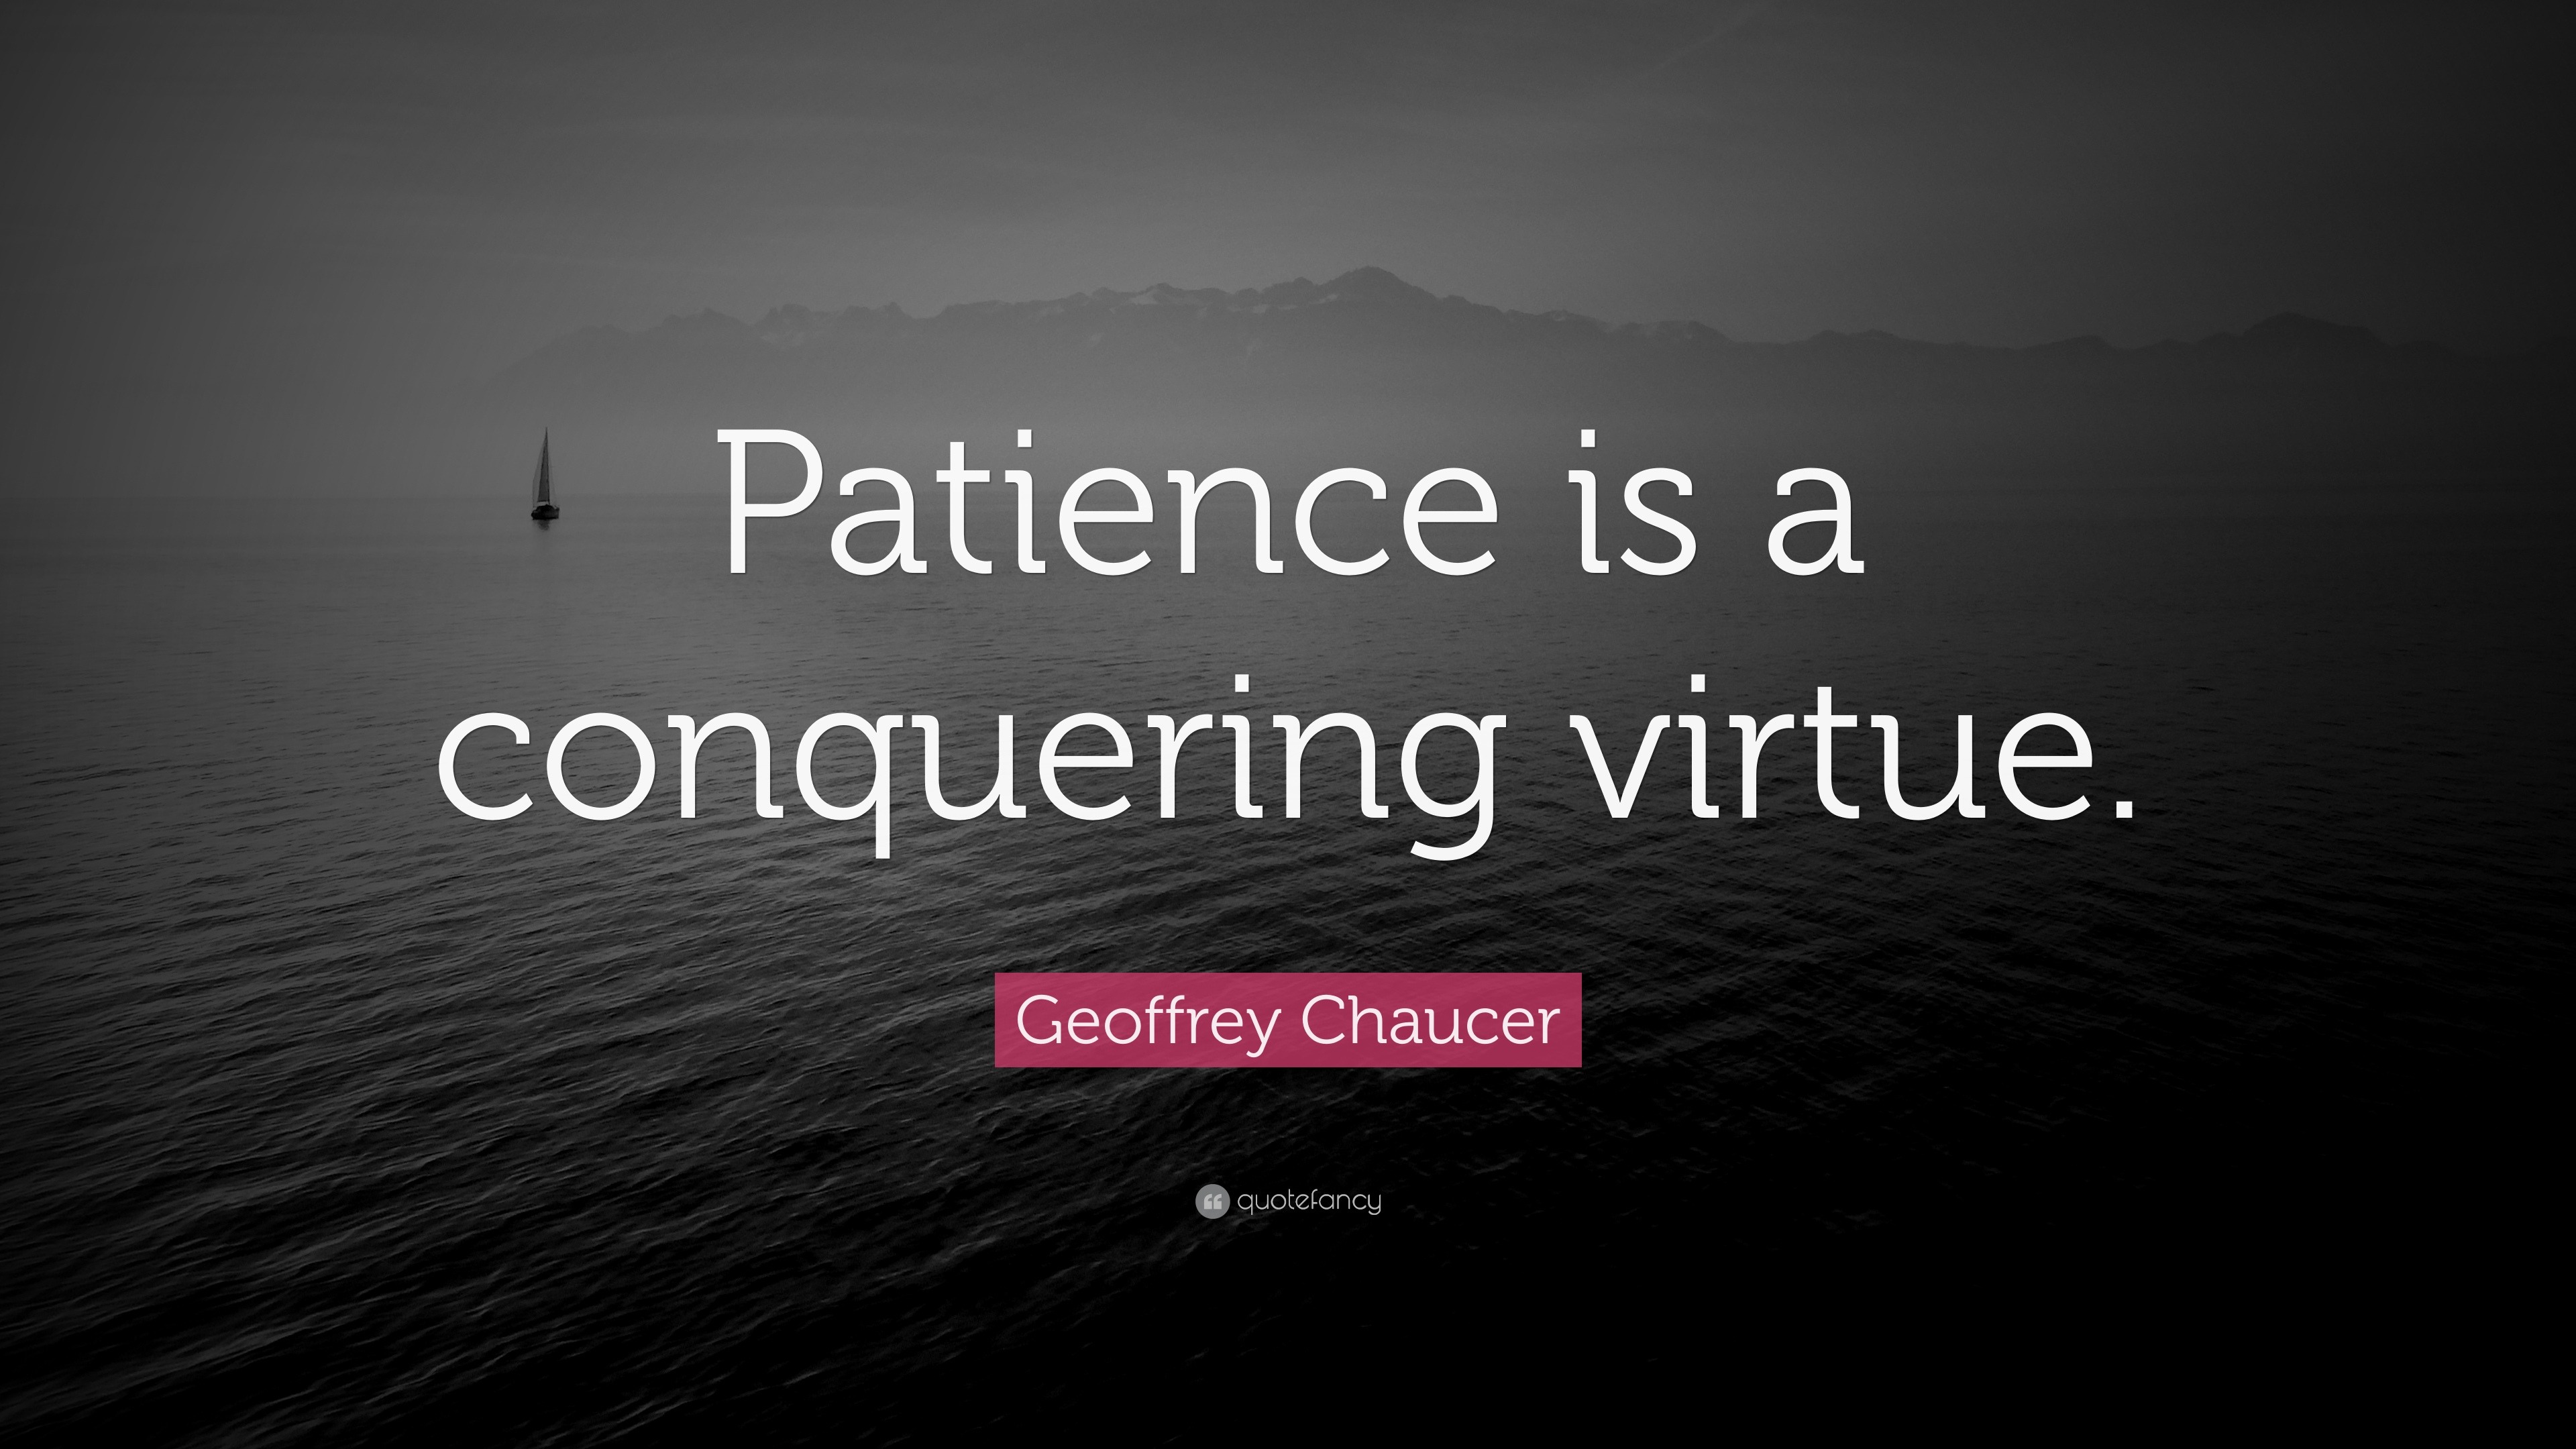 Patience Quotes “Patience is a conquering virtue ” — Geoffrey Chaucer